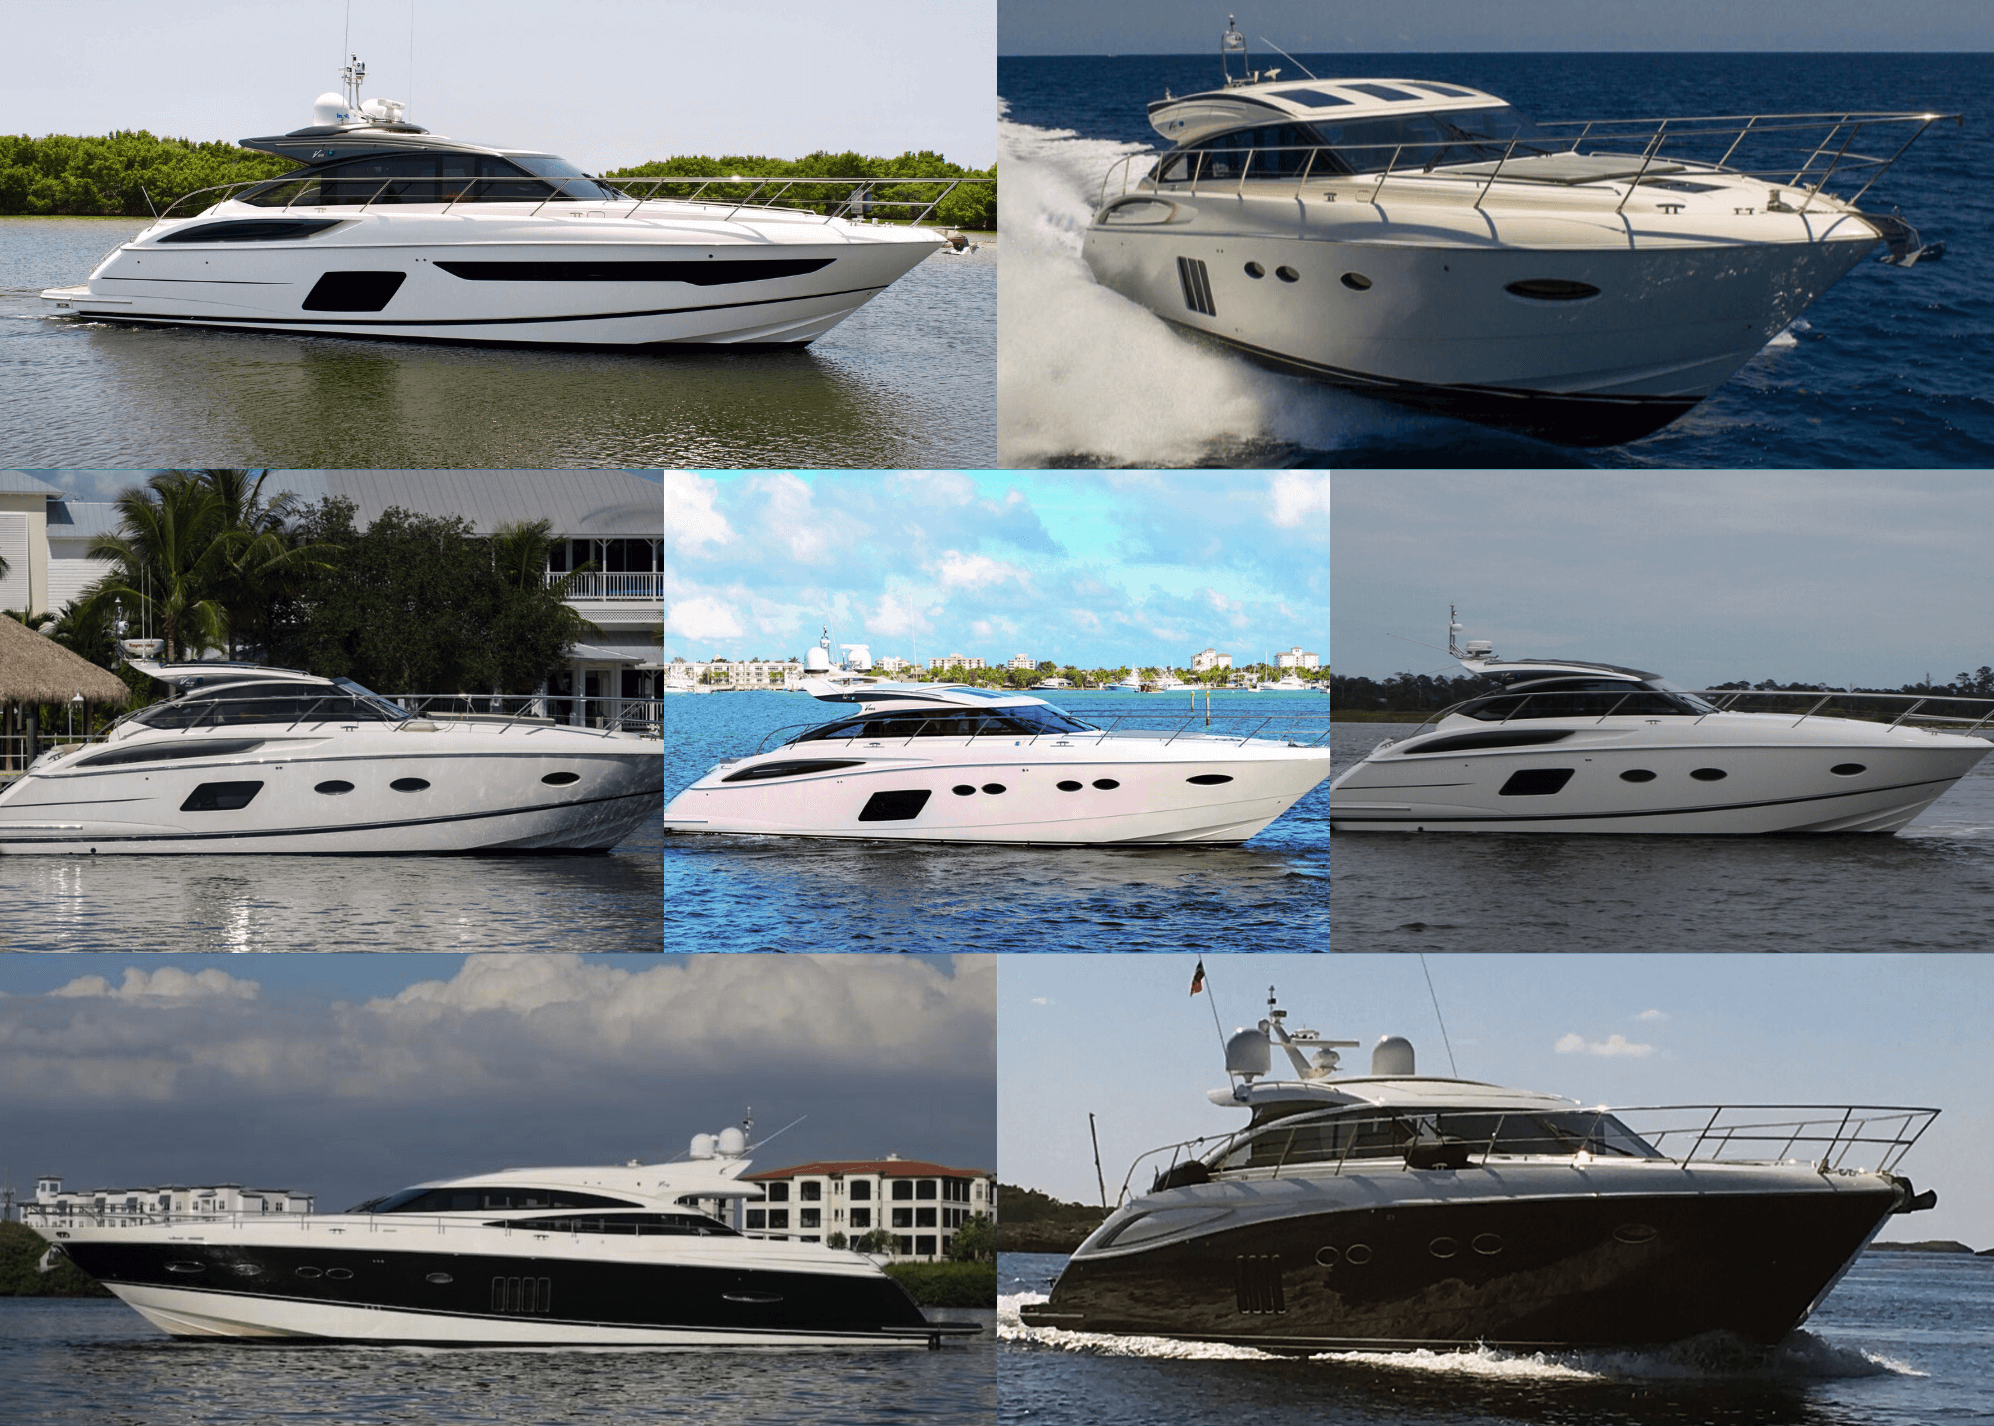 HMY Lists 7 Pre-Owned Princess Sport Cruisers Priced to Sell